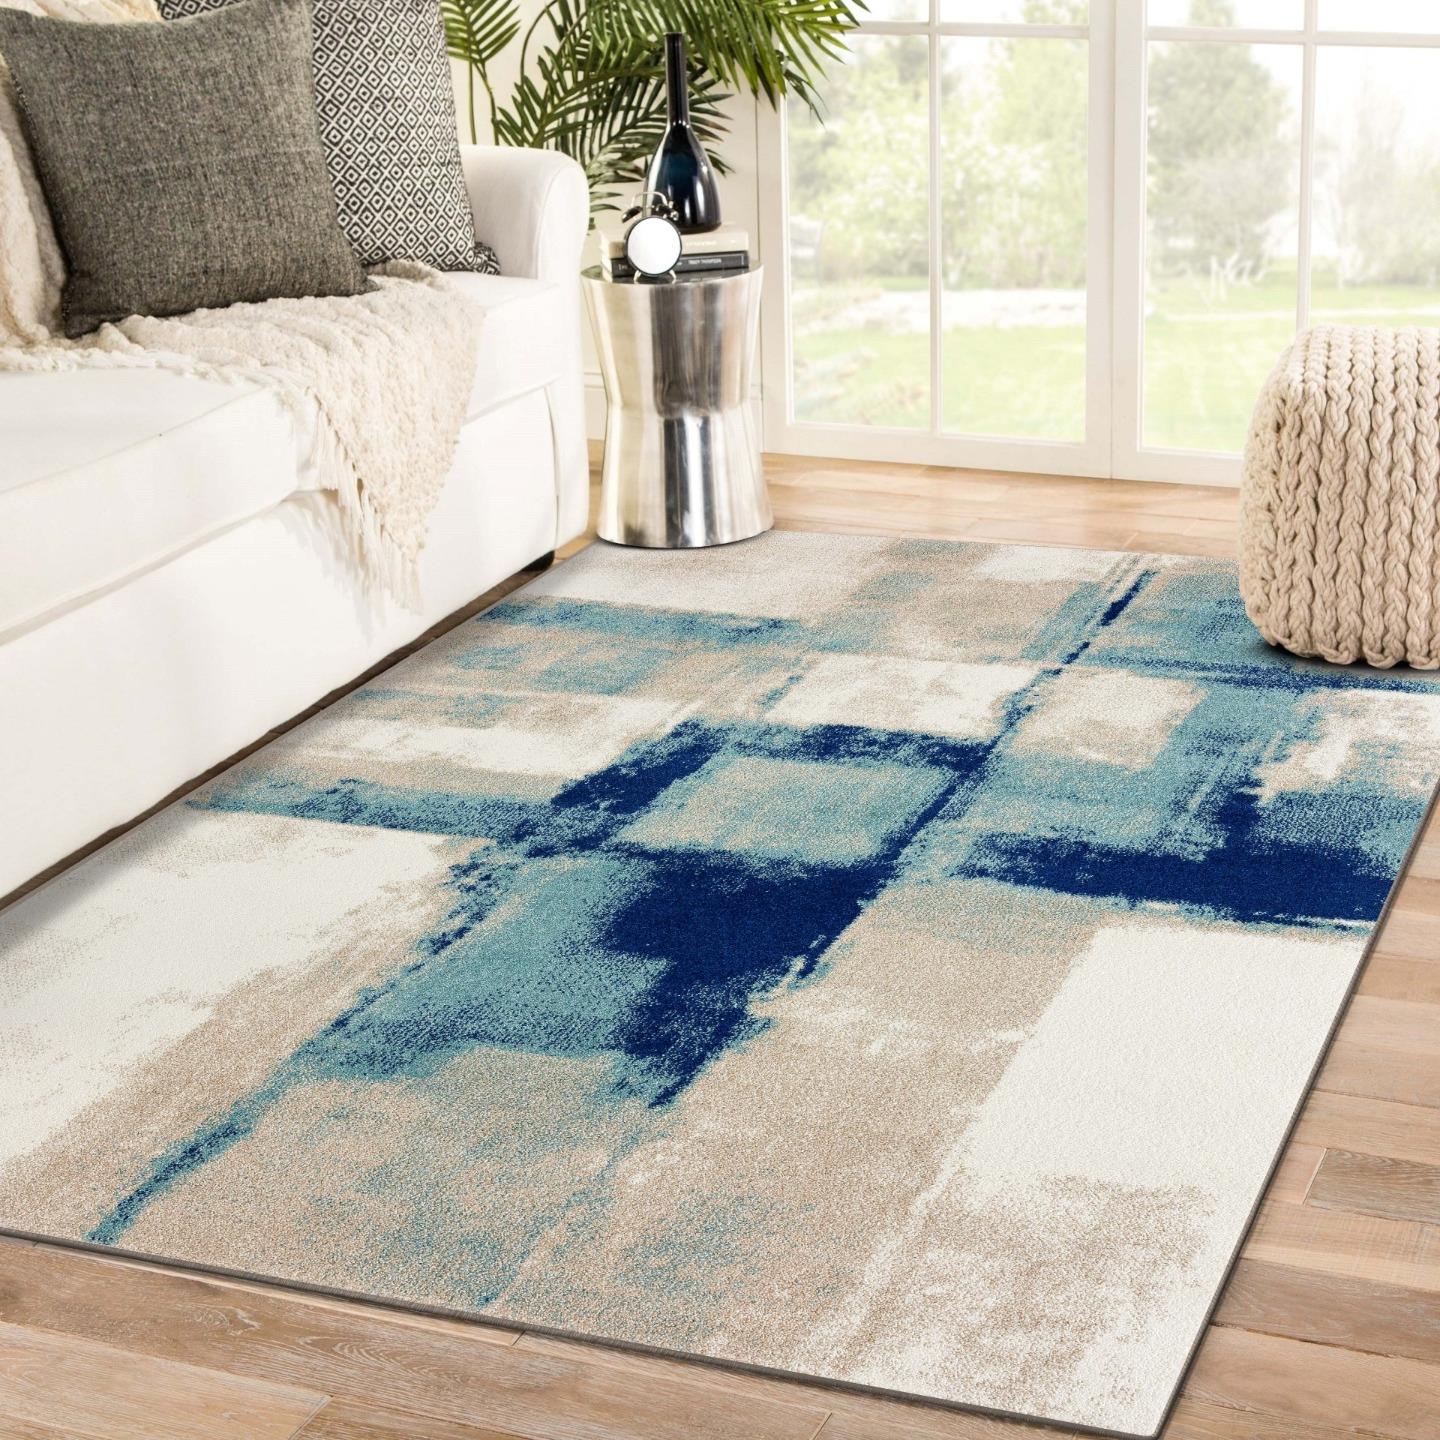  Gaming Area Rug 5x7 Rugs for Living Room Bedroom Non